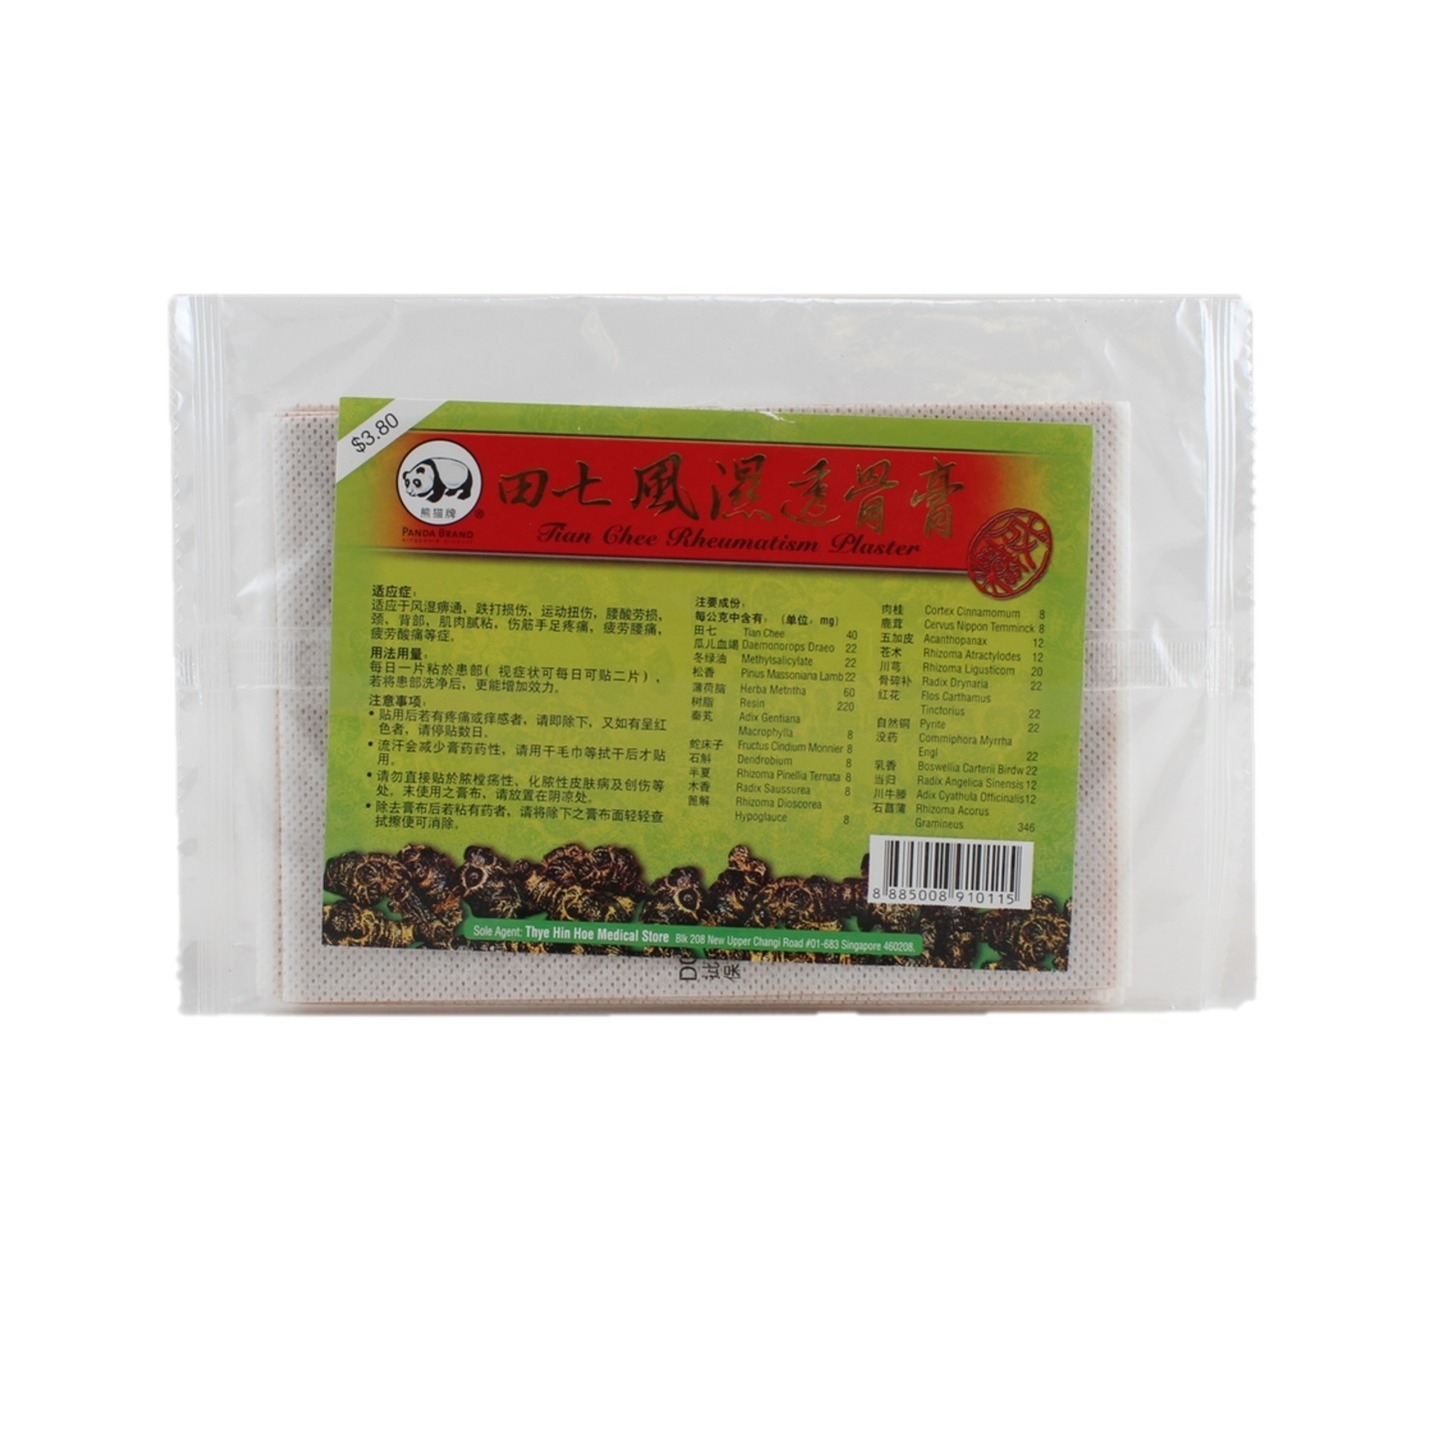 Tian Chee Rheumatism Plaster L PROMOTION FOR 12